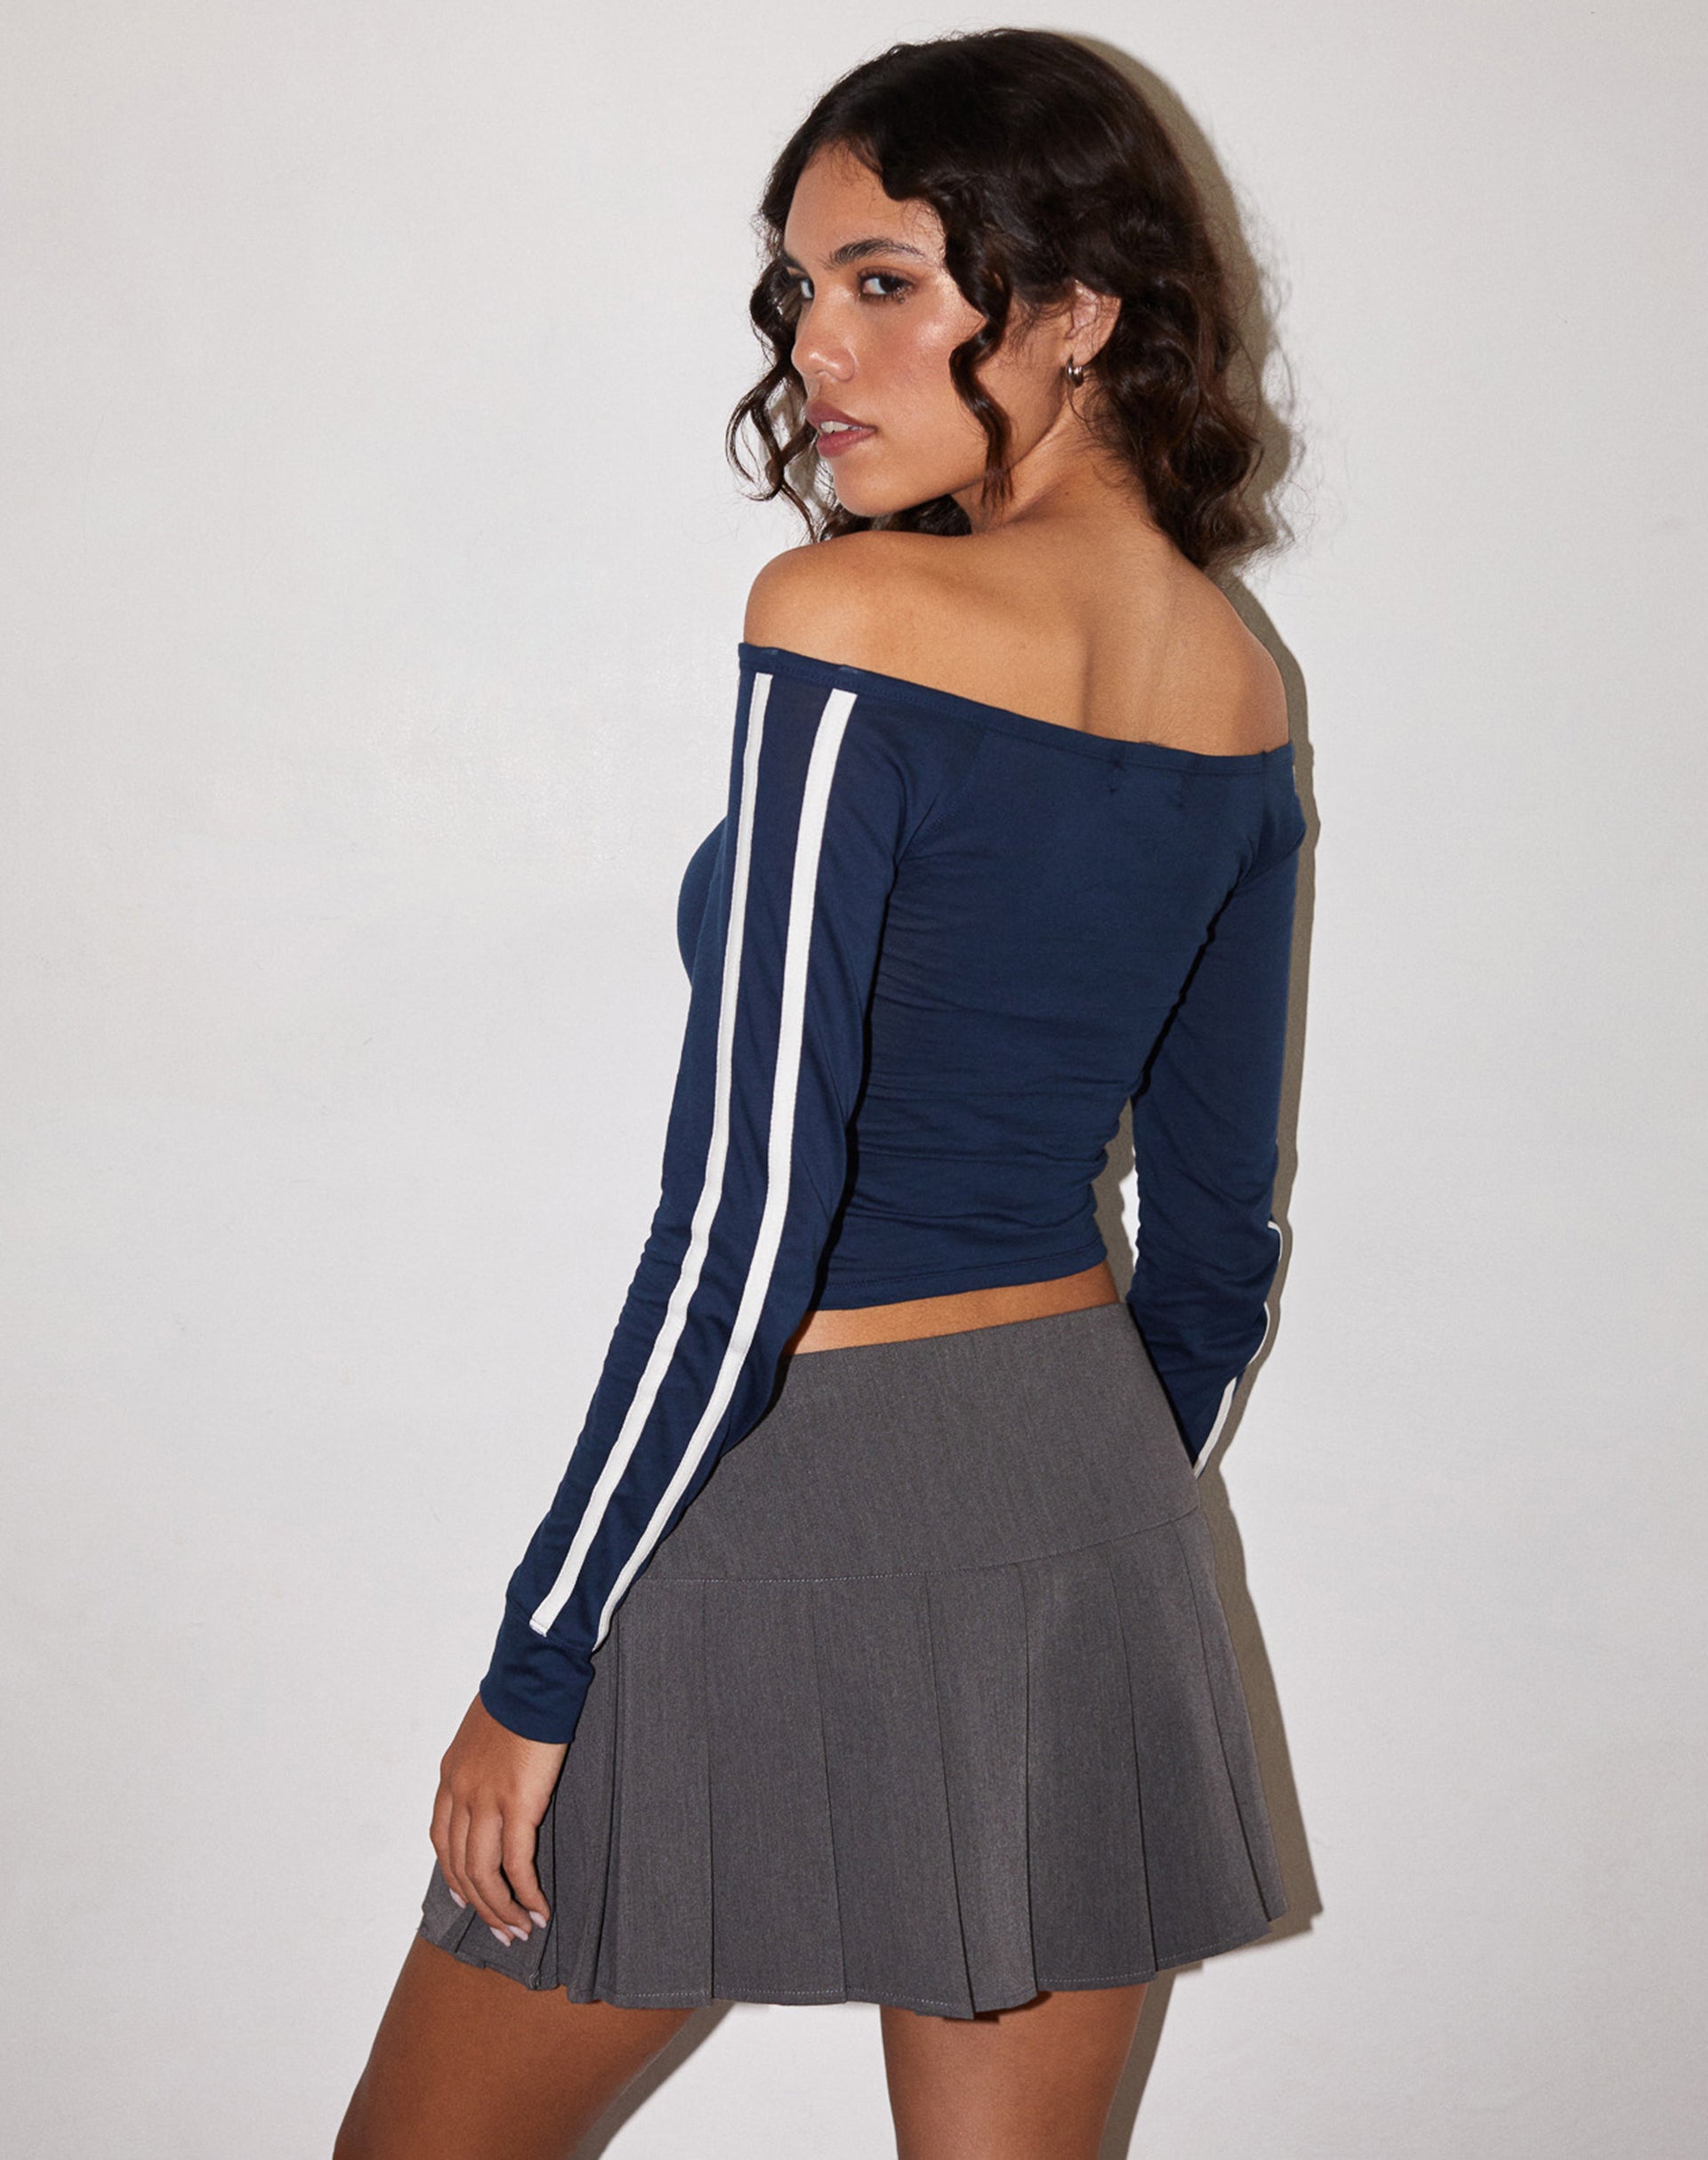 Image of Gavya Long Sleeve Top in Navy with White Piping